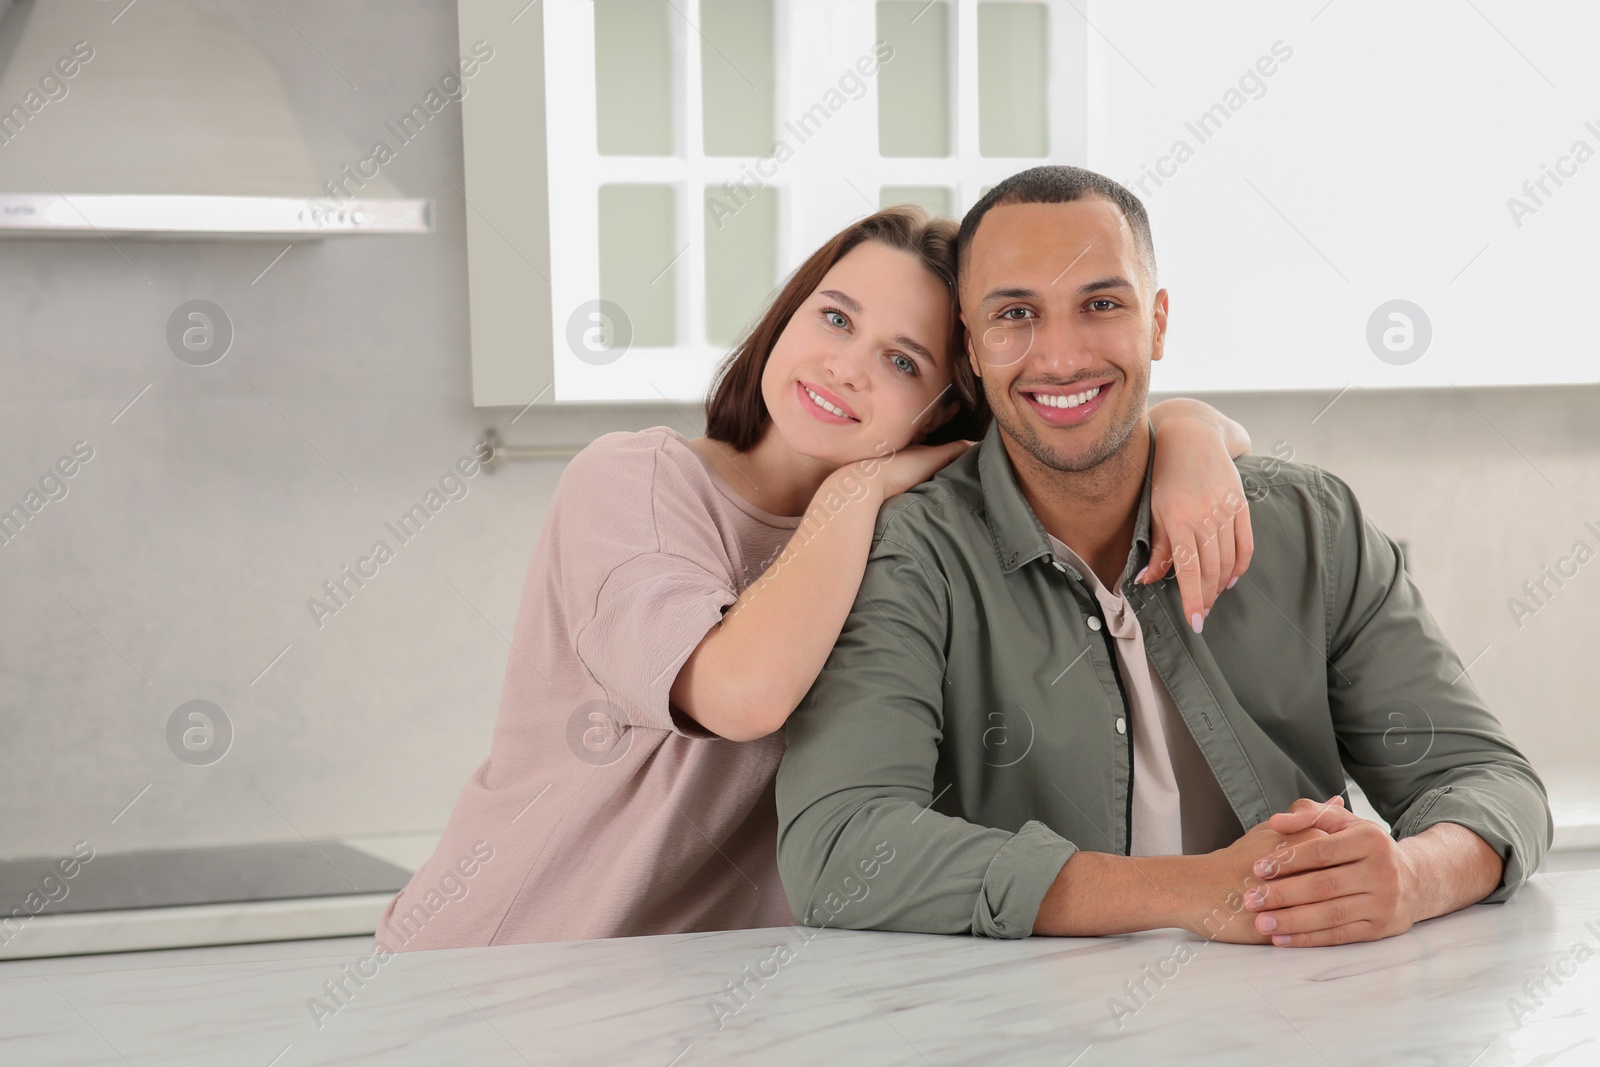 Photo of Dating agency. Happy couple spending time together in kitchen, space for text